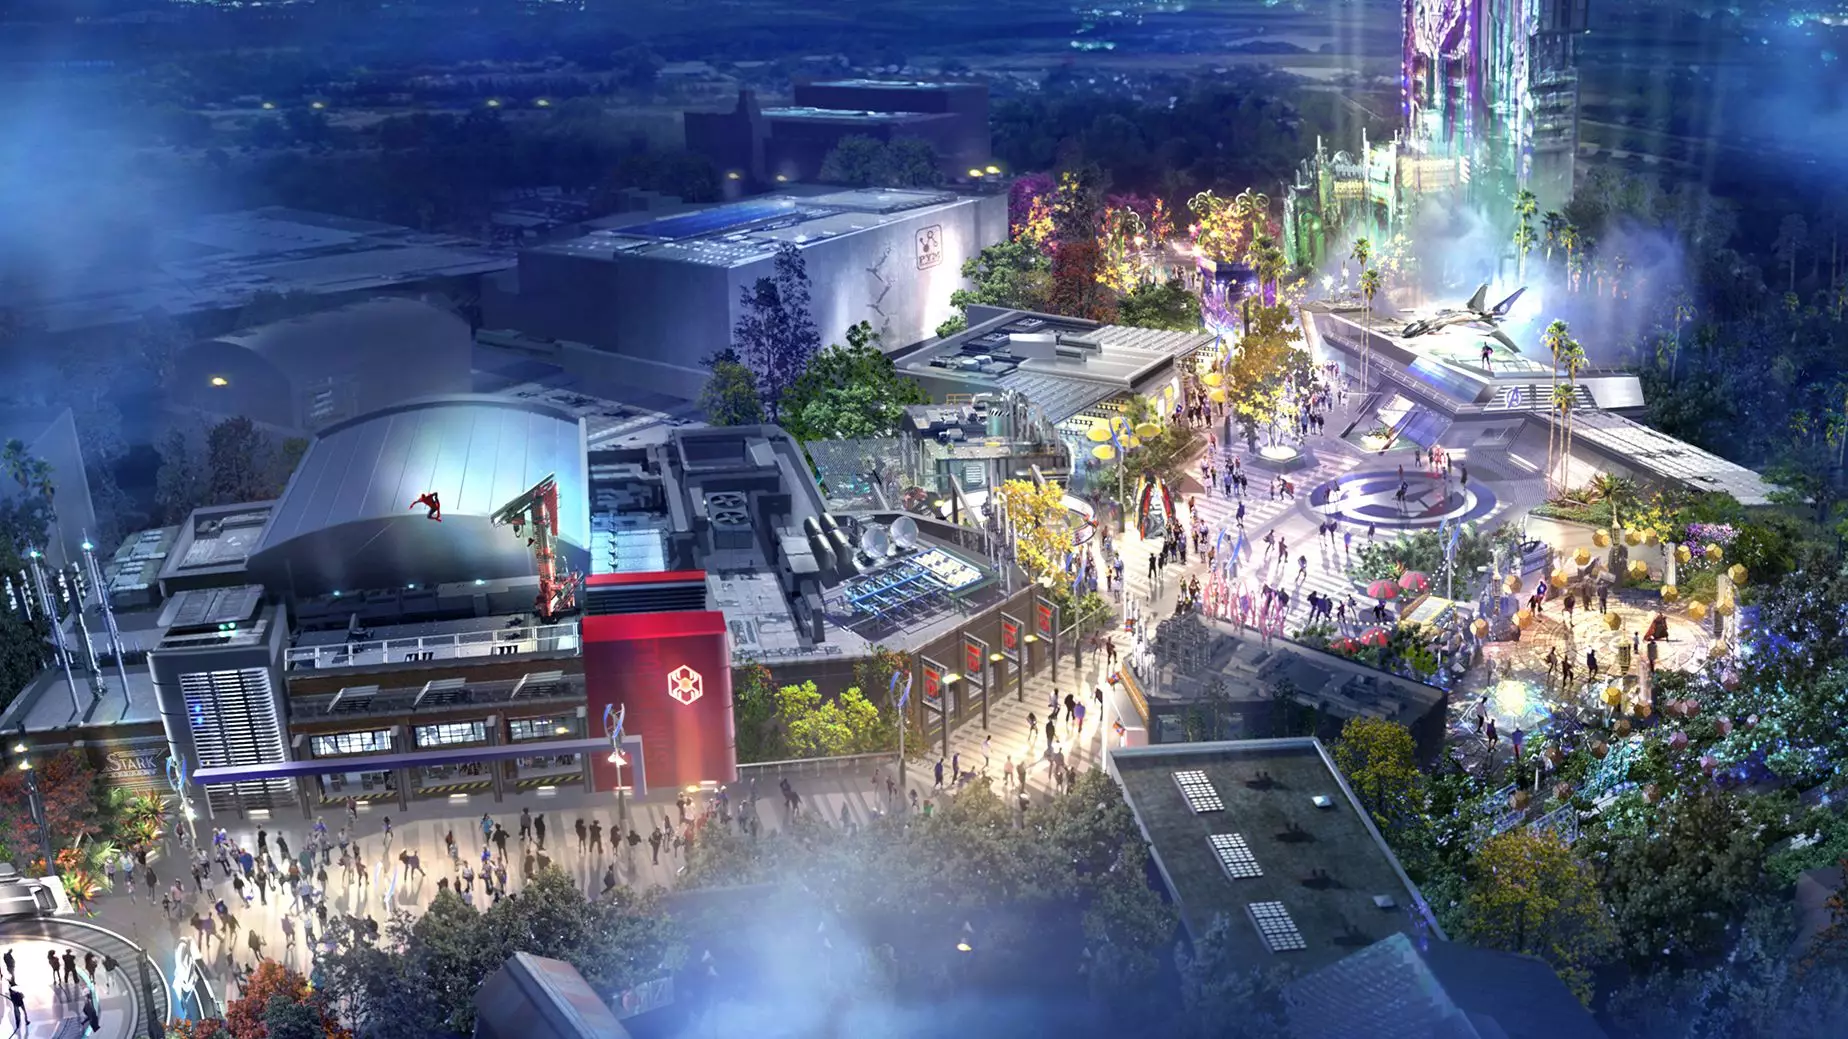 It has now been confirmed that a new Avengers-themed section of Disneyland will be ready to open this year (